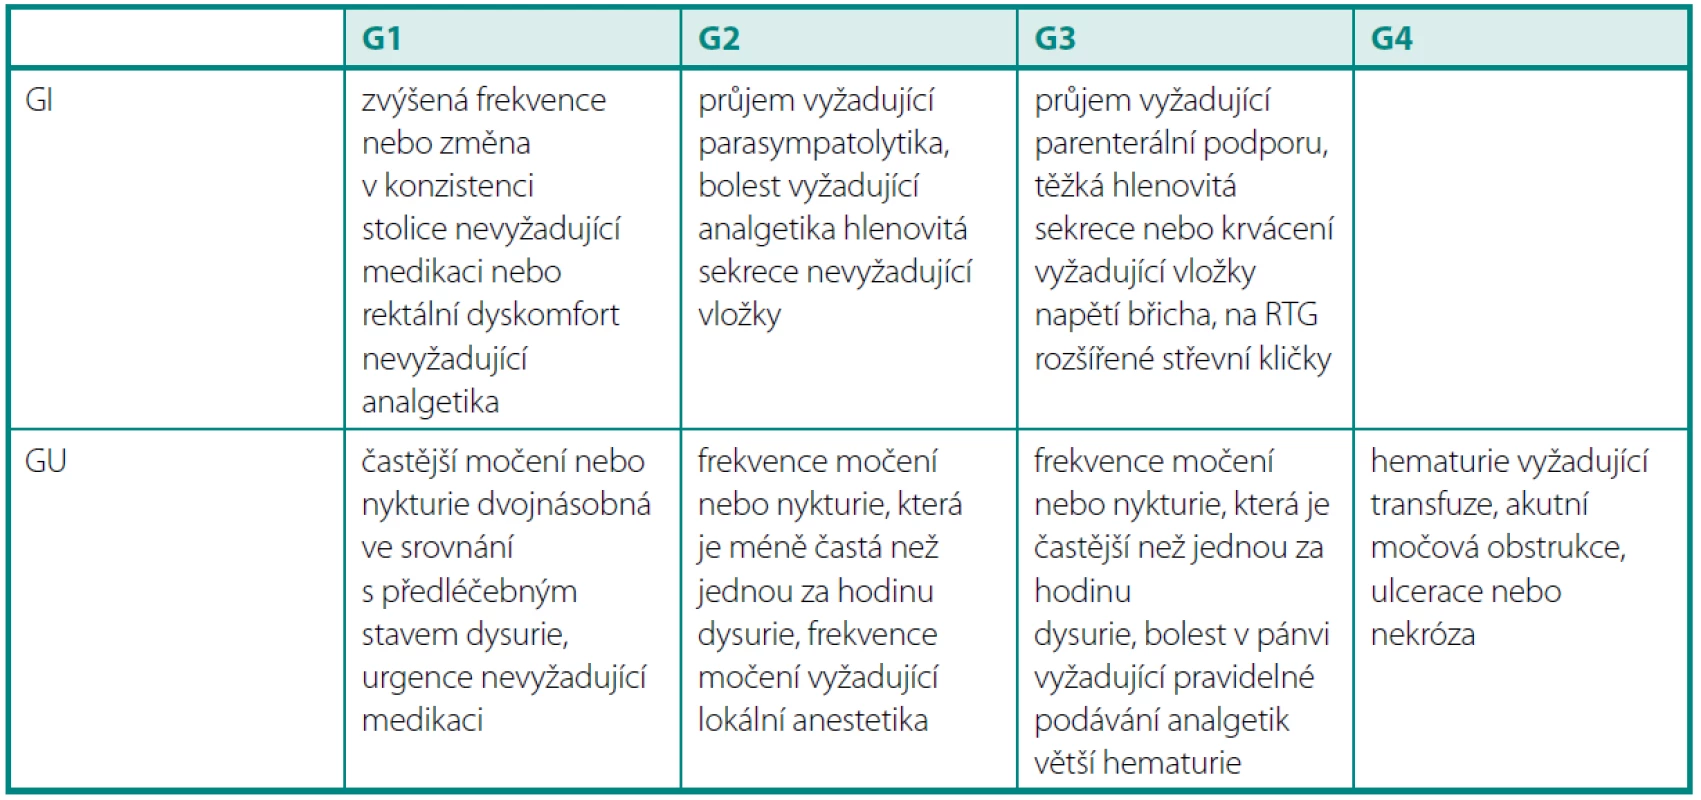 Akutní toxicita dle RTOG
Table 2. Acute toxicity according to RTOG